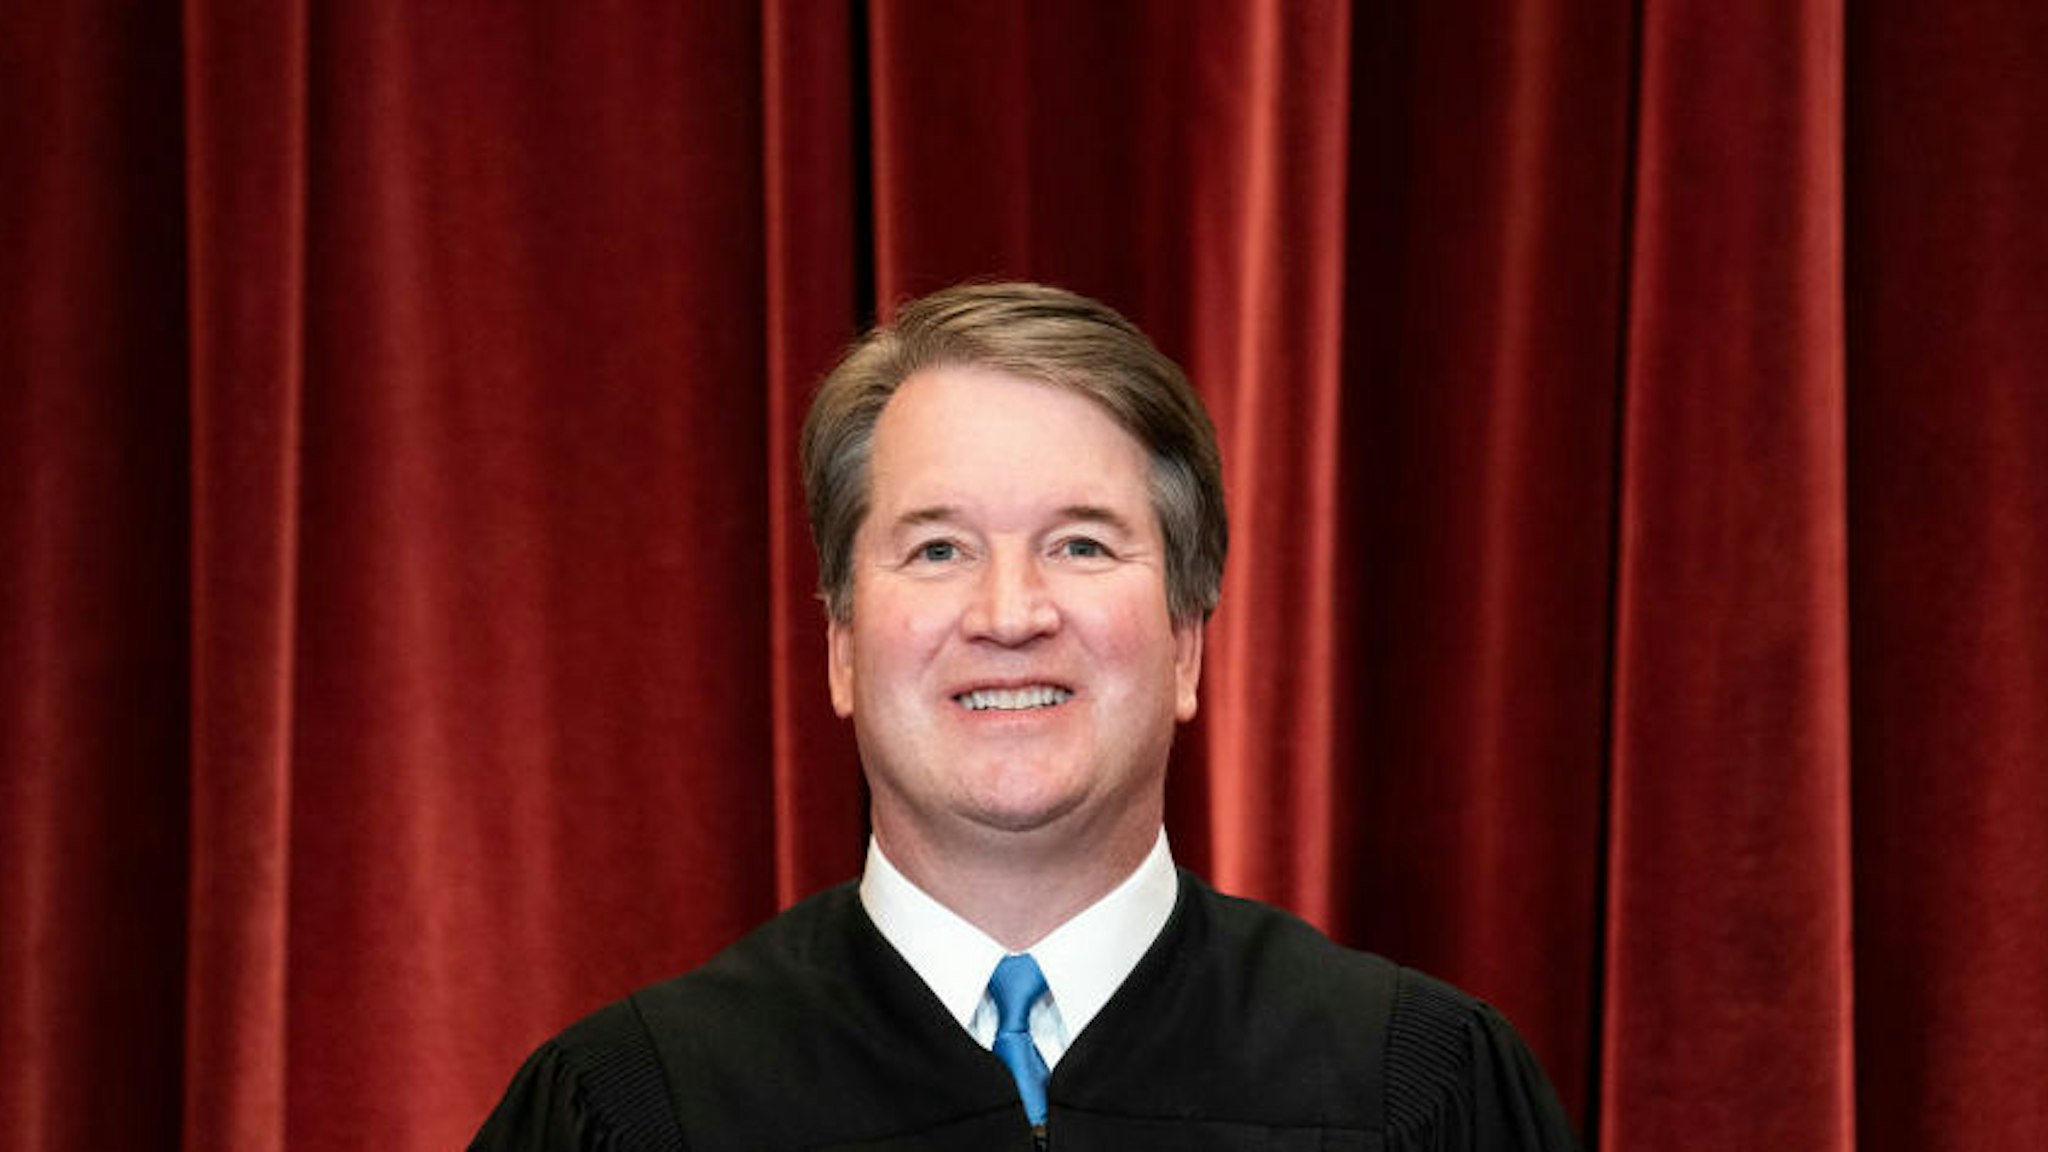 Associate Justice Brett Kavanaugh stands during a group photo of the Justices at the Supreme Court in Washington, DC on April 23, 2021.